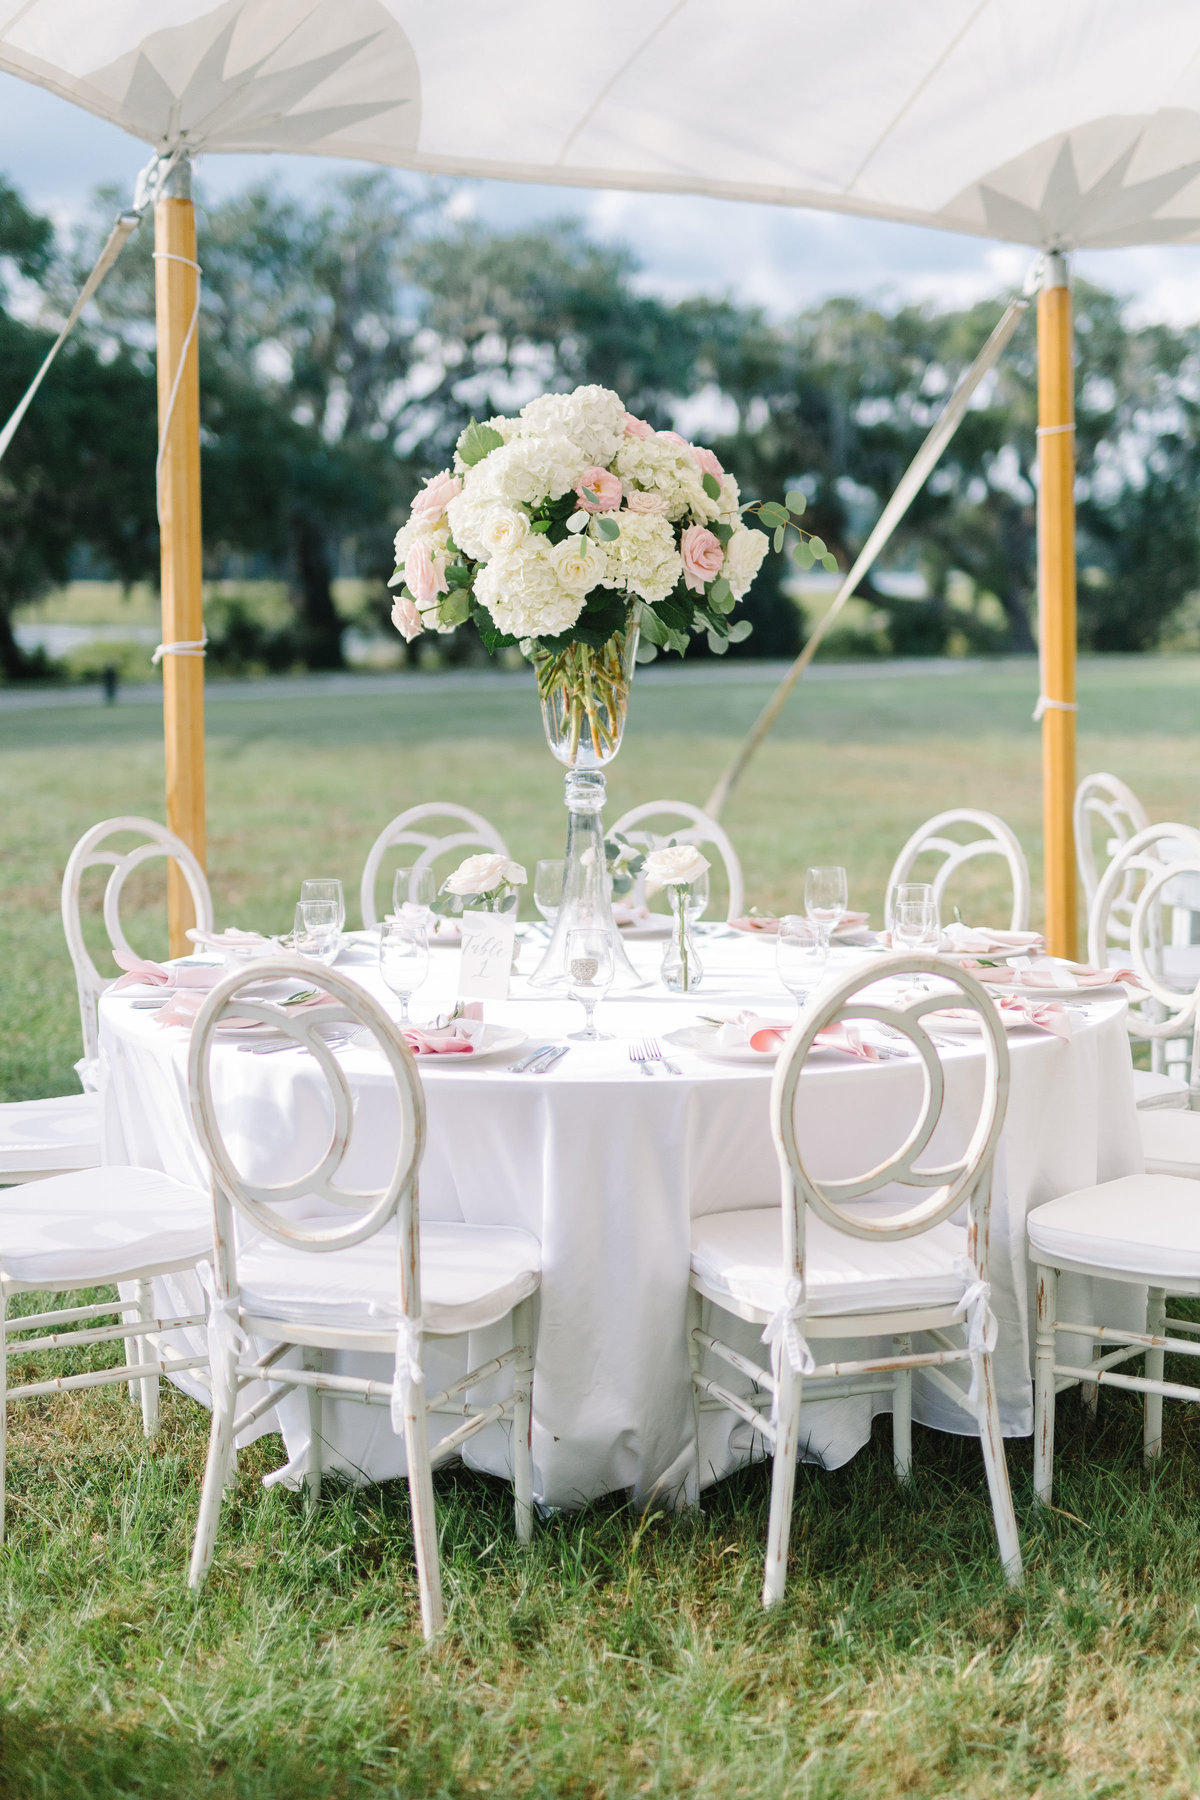 White and Blush Wedding Reception with Tall Hydrangea Centerpiece and White Chloe Chairs  under Sailcloth Tent at Boone Hall